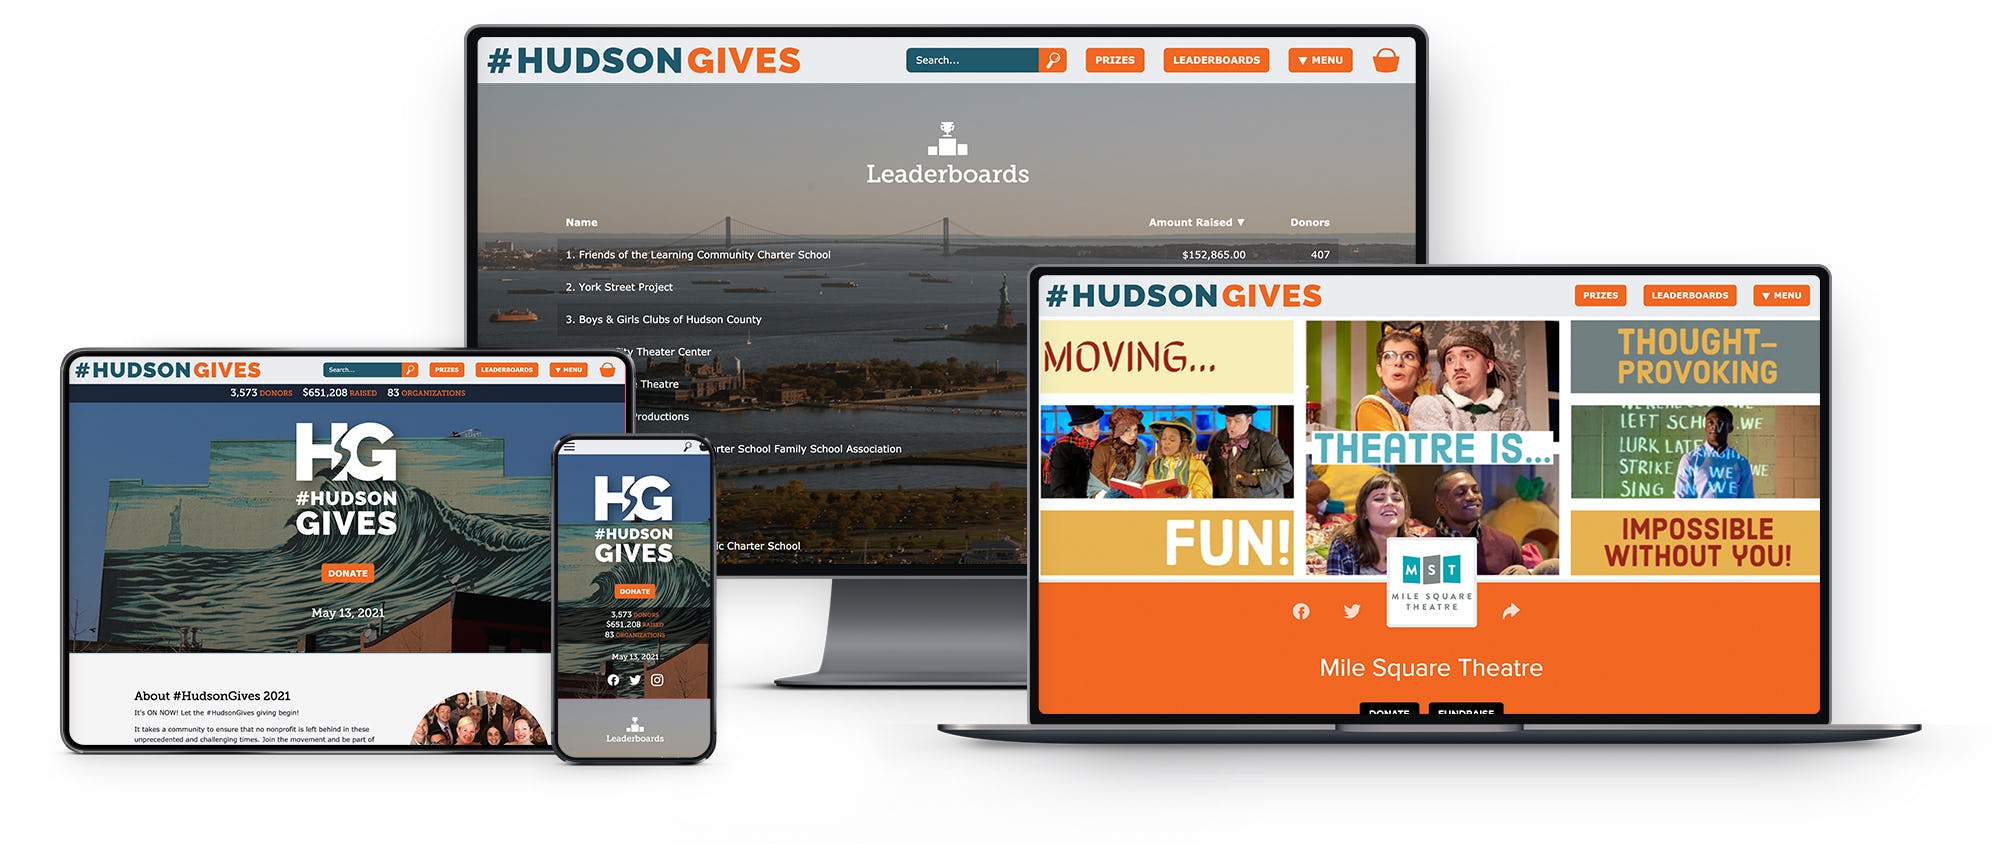 GiveGab Software - Giving Day Product: With our commitment to regular feature updates, live chat support, and access to peer-to-peer fundraising and matching technology, you can maximize awareness, engagement, and donations for your community, school, or organization.